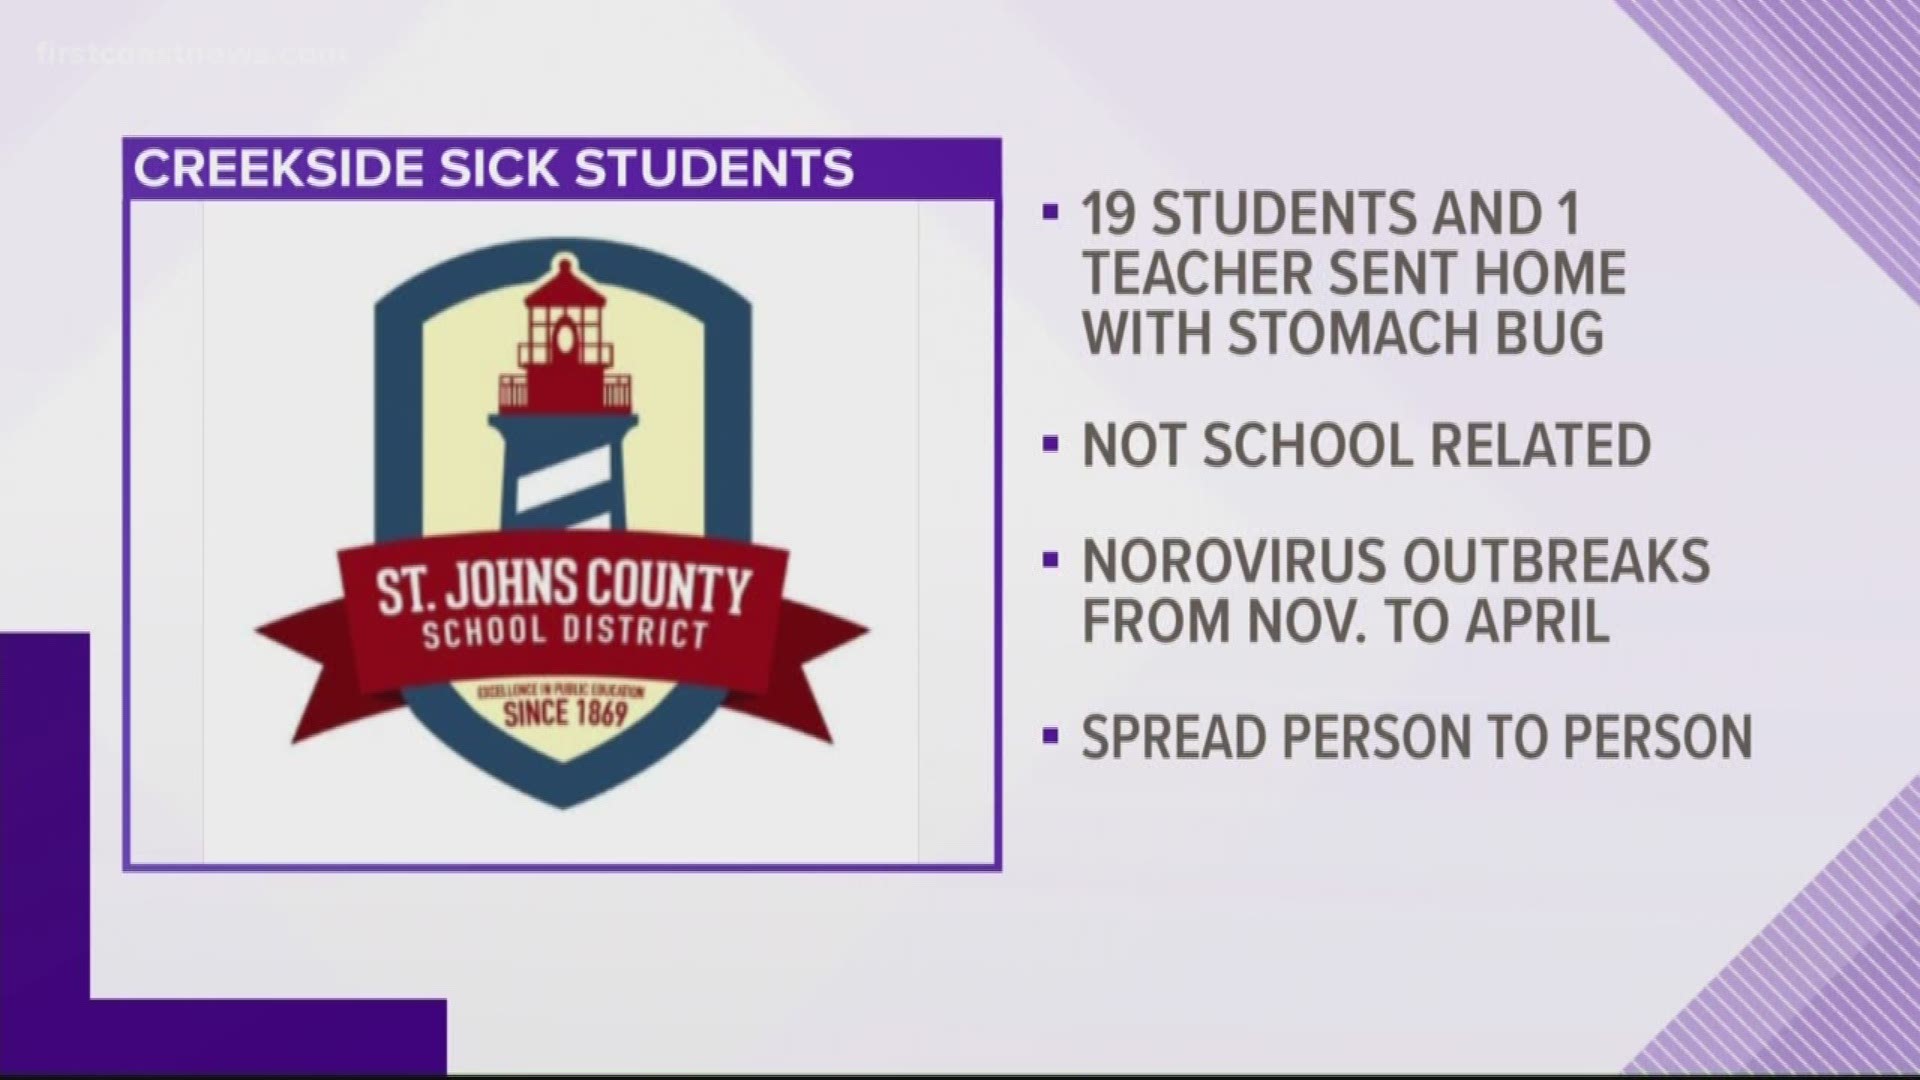 School district officials said a total of nineteen students and one teacher were sent home Thursday after having stomach issues.